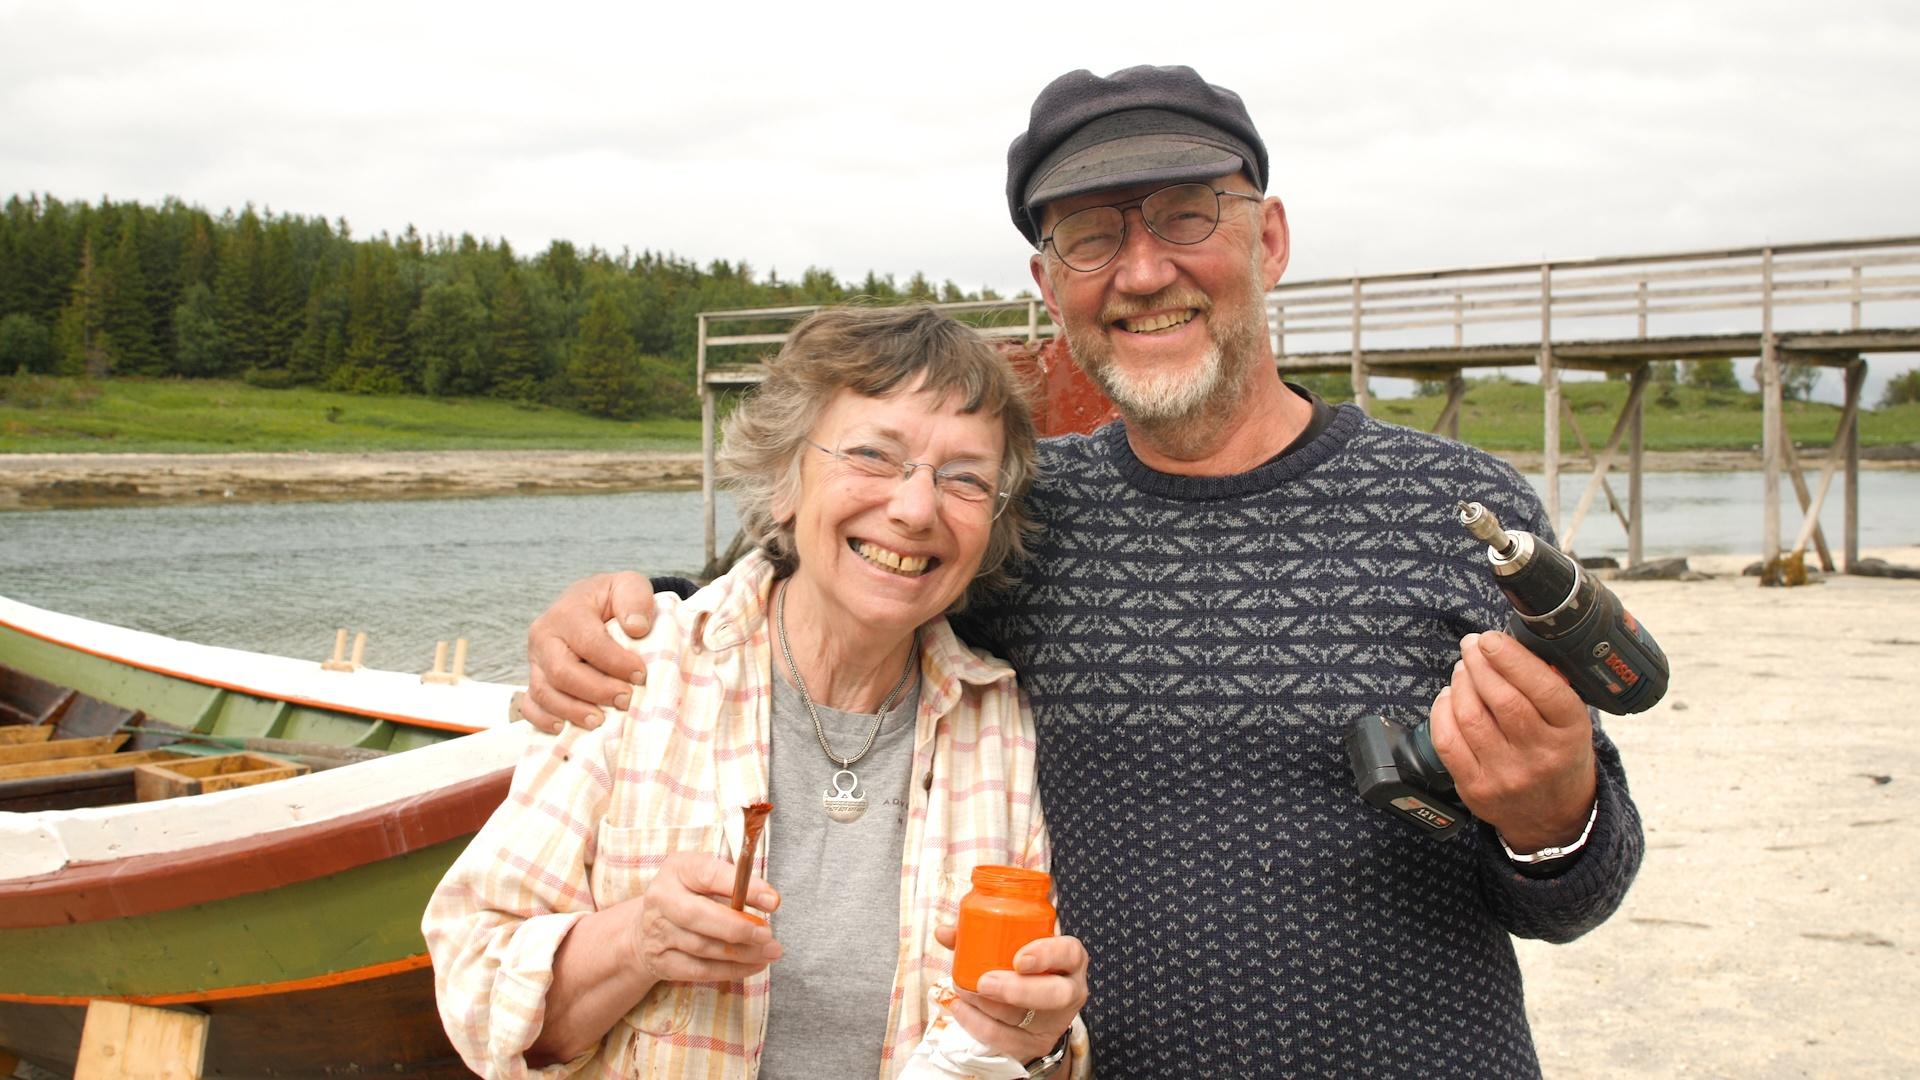 Norland Boat builder Ulf Mikalsen and his spouse